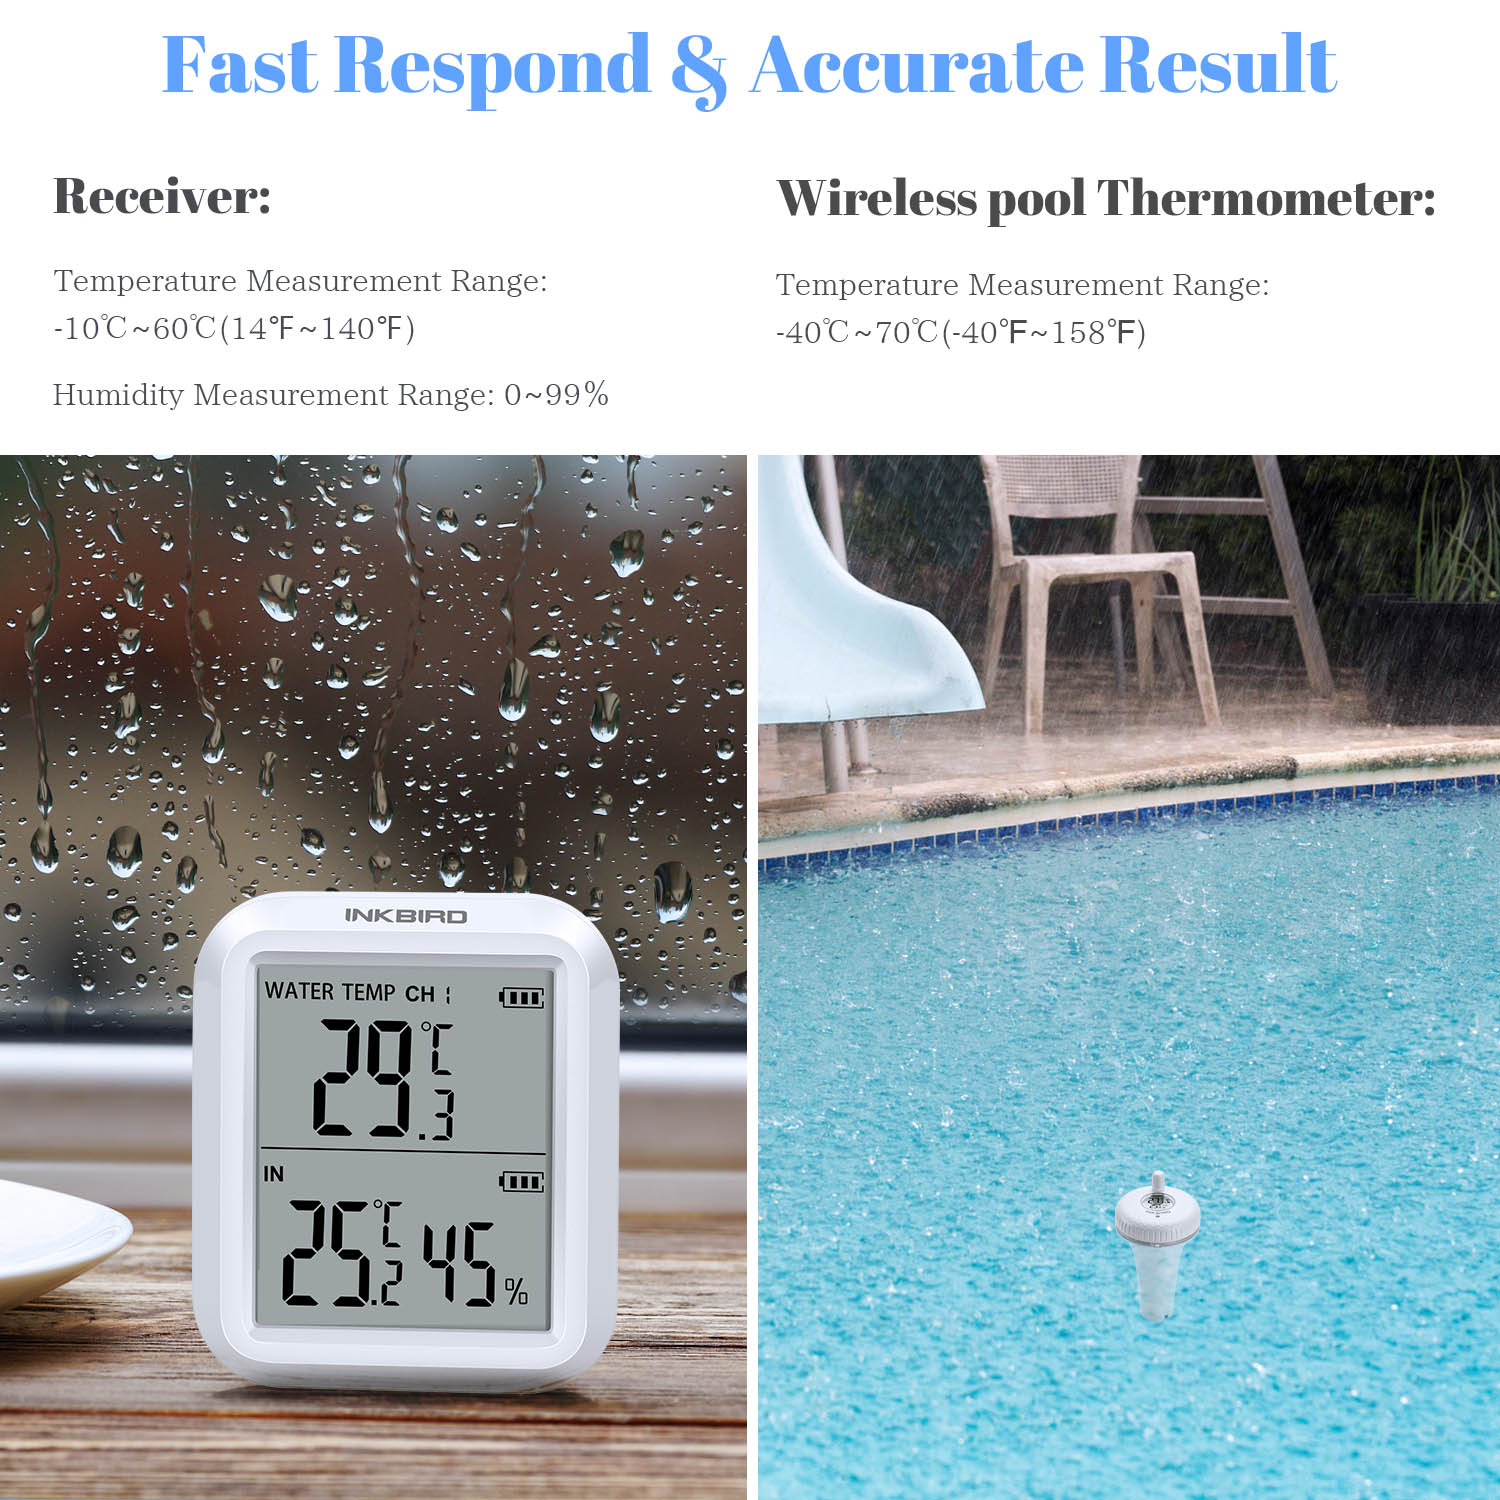 High Accuracy Wireless Pool Thermometer